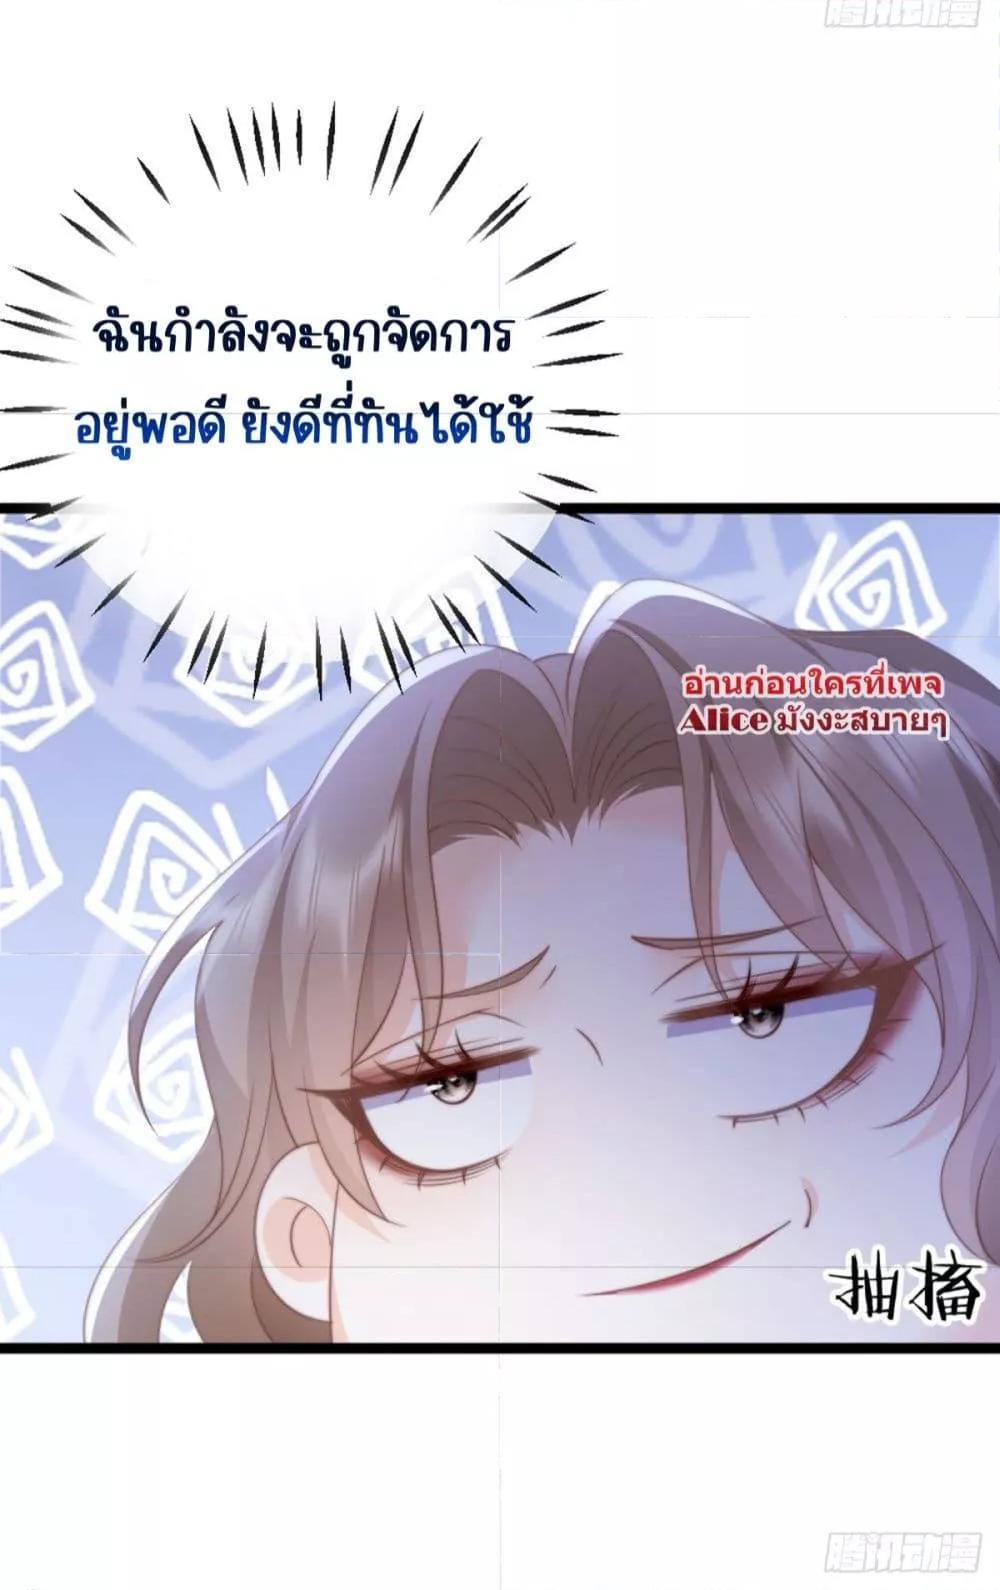 Goxuewen Female Supporting Role She Quit โ€“ เธเธญเธเธฐเธ—เธตเธเธฑเธเธเธ—เธขเธฑเธขเธ•เธฑเธงเธฃเนเธฒเธขเนเธเธเธดเธขเธฒเธขเธเนเธณเน€เธเนเธฒ เธ•เธญเธเธ—เธตเน 3 (30)